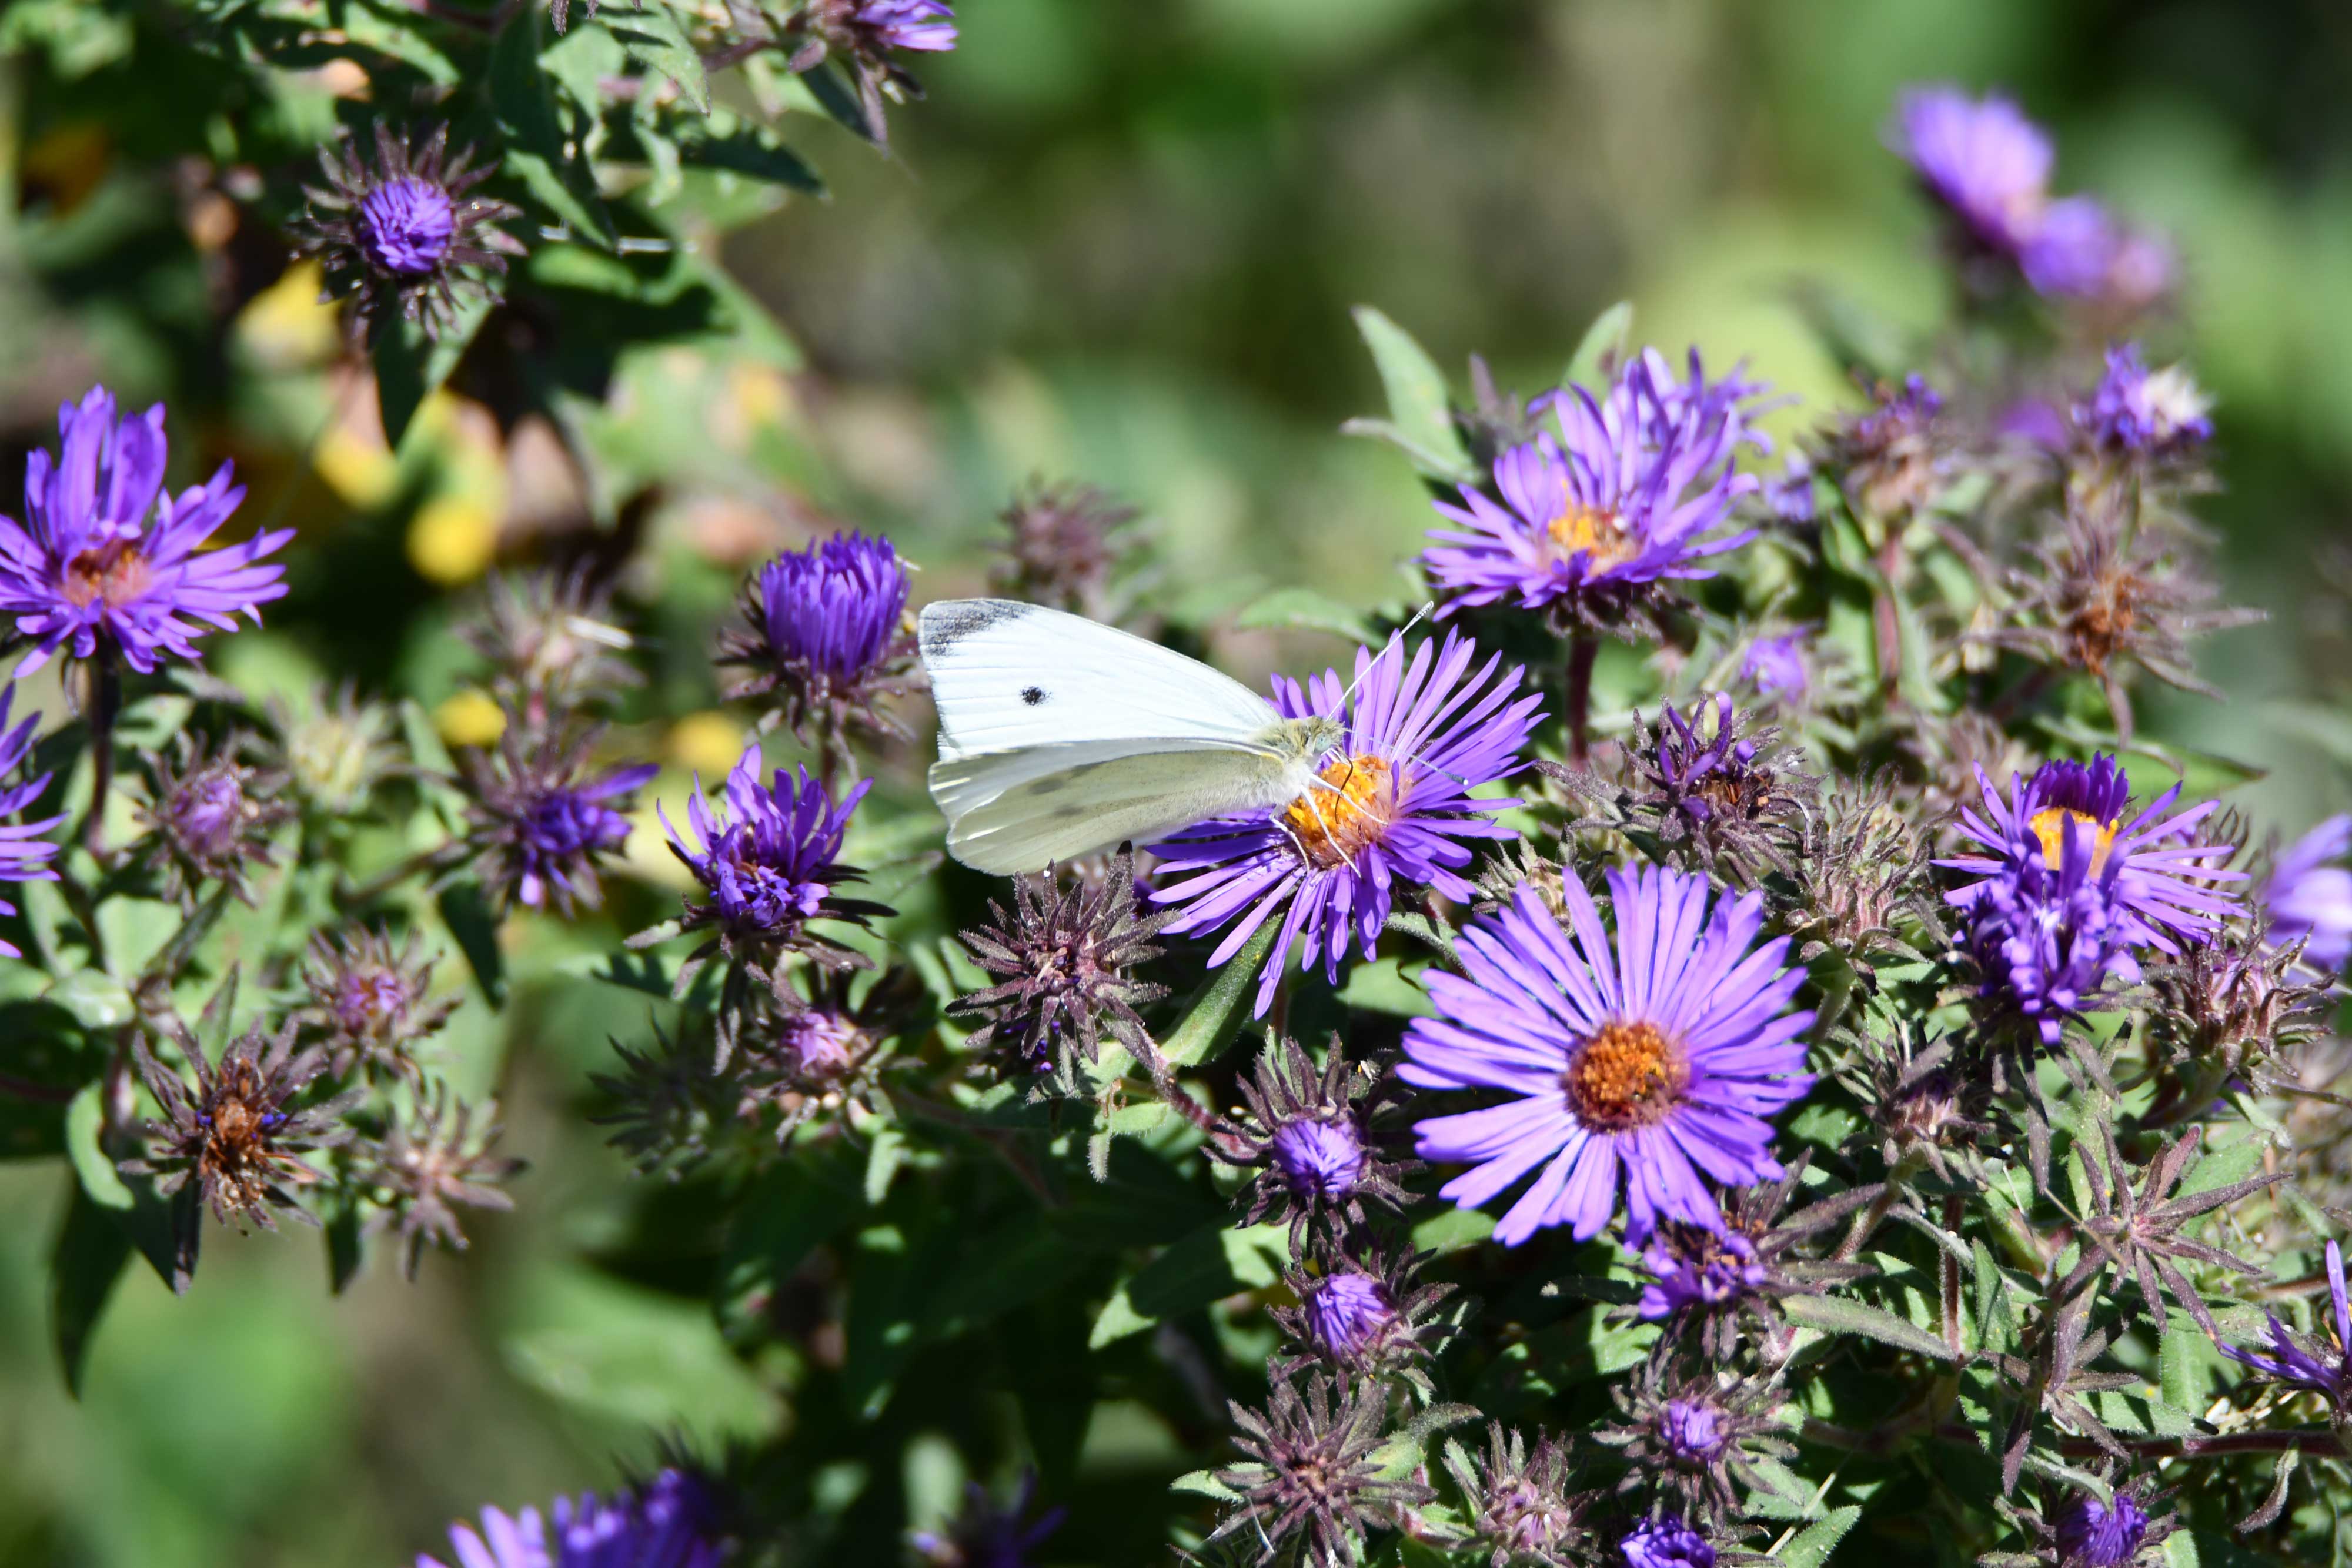 Cabbage white butterfly on asters.